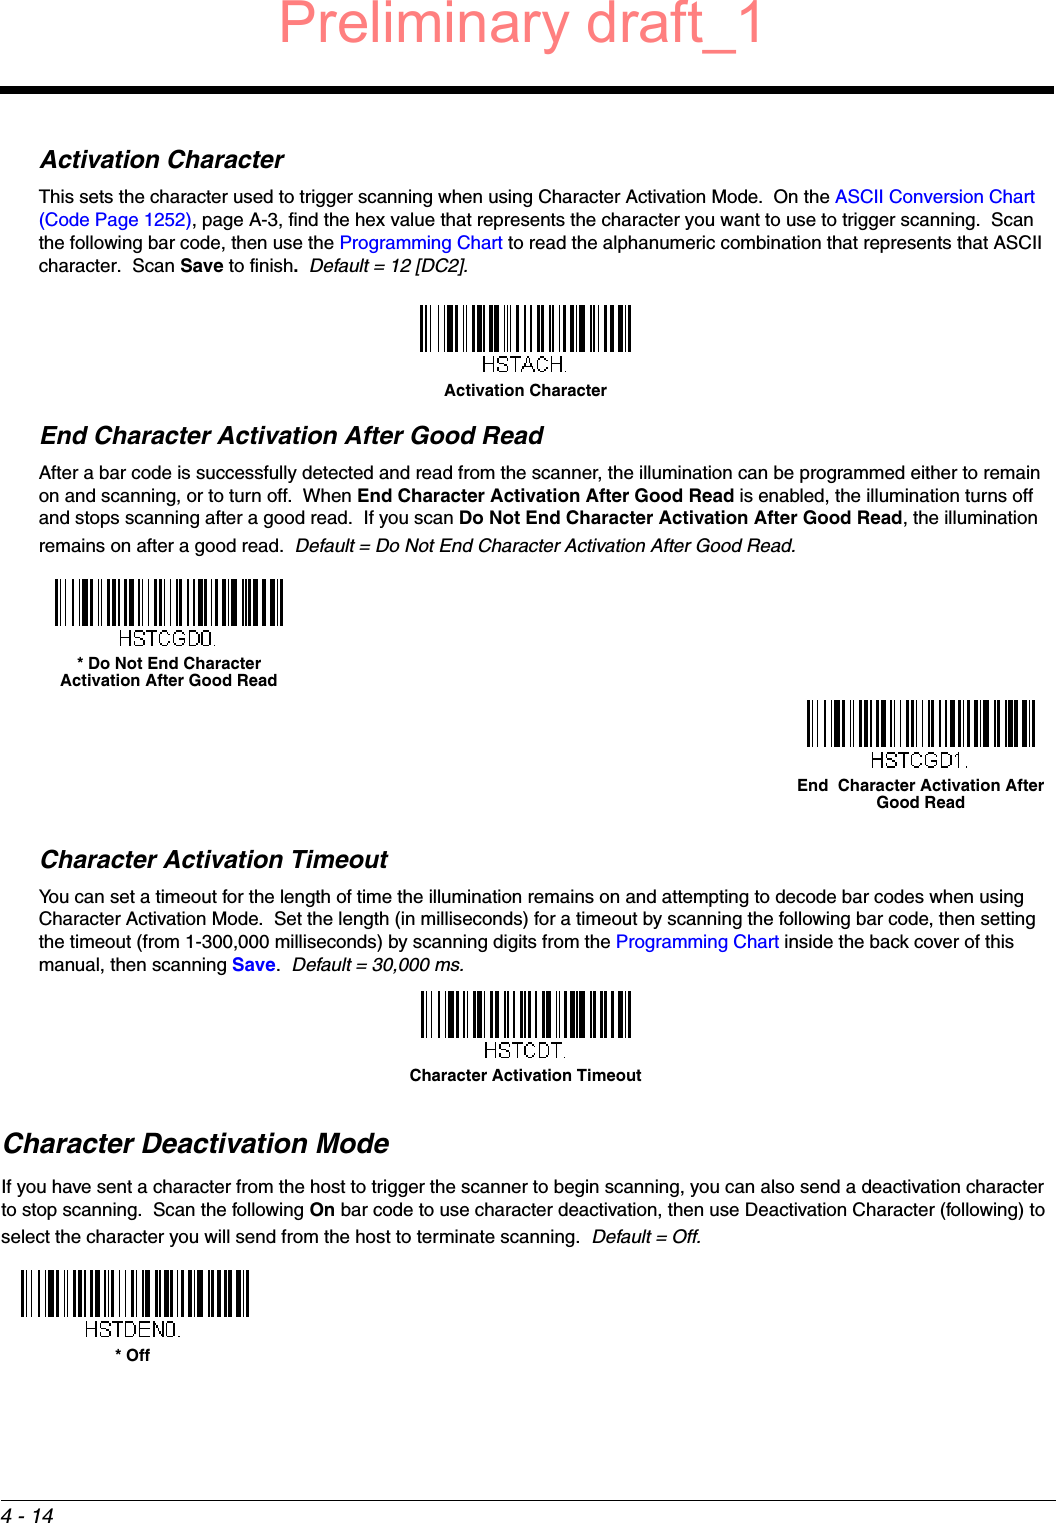 4 - 14Activation CharacterThis sets the character used to trigger scanning when using Character Activation Mode.  On the ASCII Conversion Chart (Code Page 1252), page A-3, find the hex value that represents the character you want to use to trigger scanning.  Scan the following bar code, then use the Programming Chart to read the alphanumeric combination that represents that ASCII character.  Scan Save to finish.  Default = 12 [DC2].End Character Activation After Good ReadAfter a bar code is successfully detected and read from the scanner, the illumination can be programmed either to remain on and scanning, or to turn off.  When End Character Activation After Good Read is enabled, the illumination turns off and stops scanning after a good read.  If you scan Do Not End Character Activation After Good Read, the illumination remains on after a good read.  Default = Do Not End Character Activation After Good Read.Character Activation TimeoutYou can set a timeout for the length of time the illumination remains on and attempting to decode bar codes when using Character Activation Mode.  Set the length (in milliseconds) for a timeout by scanning the following bar code, then setting the timeout (from 1-300,000 milliseconds) by scanning digits from the Programming Chart inside the back cover of this manual, then scanning Save.  Default = 30,000 ms.Character Deactivation ModeIf you have sent a character from the host to trigger the scanner to begin scanning, you can also send a deactivation character to stop scanning.  Scan the following On bar code to use character deactivation, then use Deactivation Character (following) to select the character you will send from the host to terminate scanning.  Default = Off.Activation Character* Do Not End Character Activation After Good ReadEnd  Character Activation After Good ReadCharacter Activation Timeout* OffPreliminary draft_1